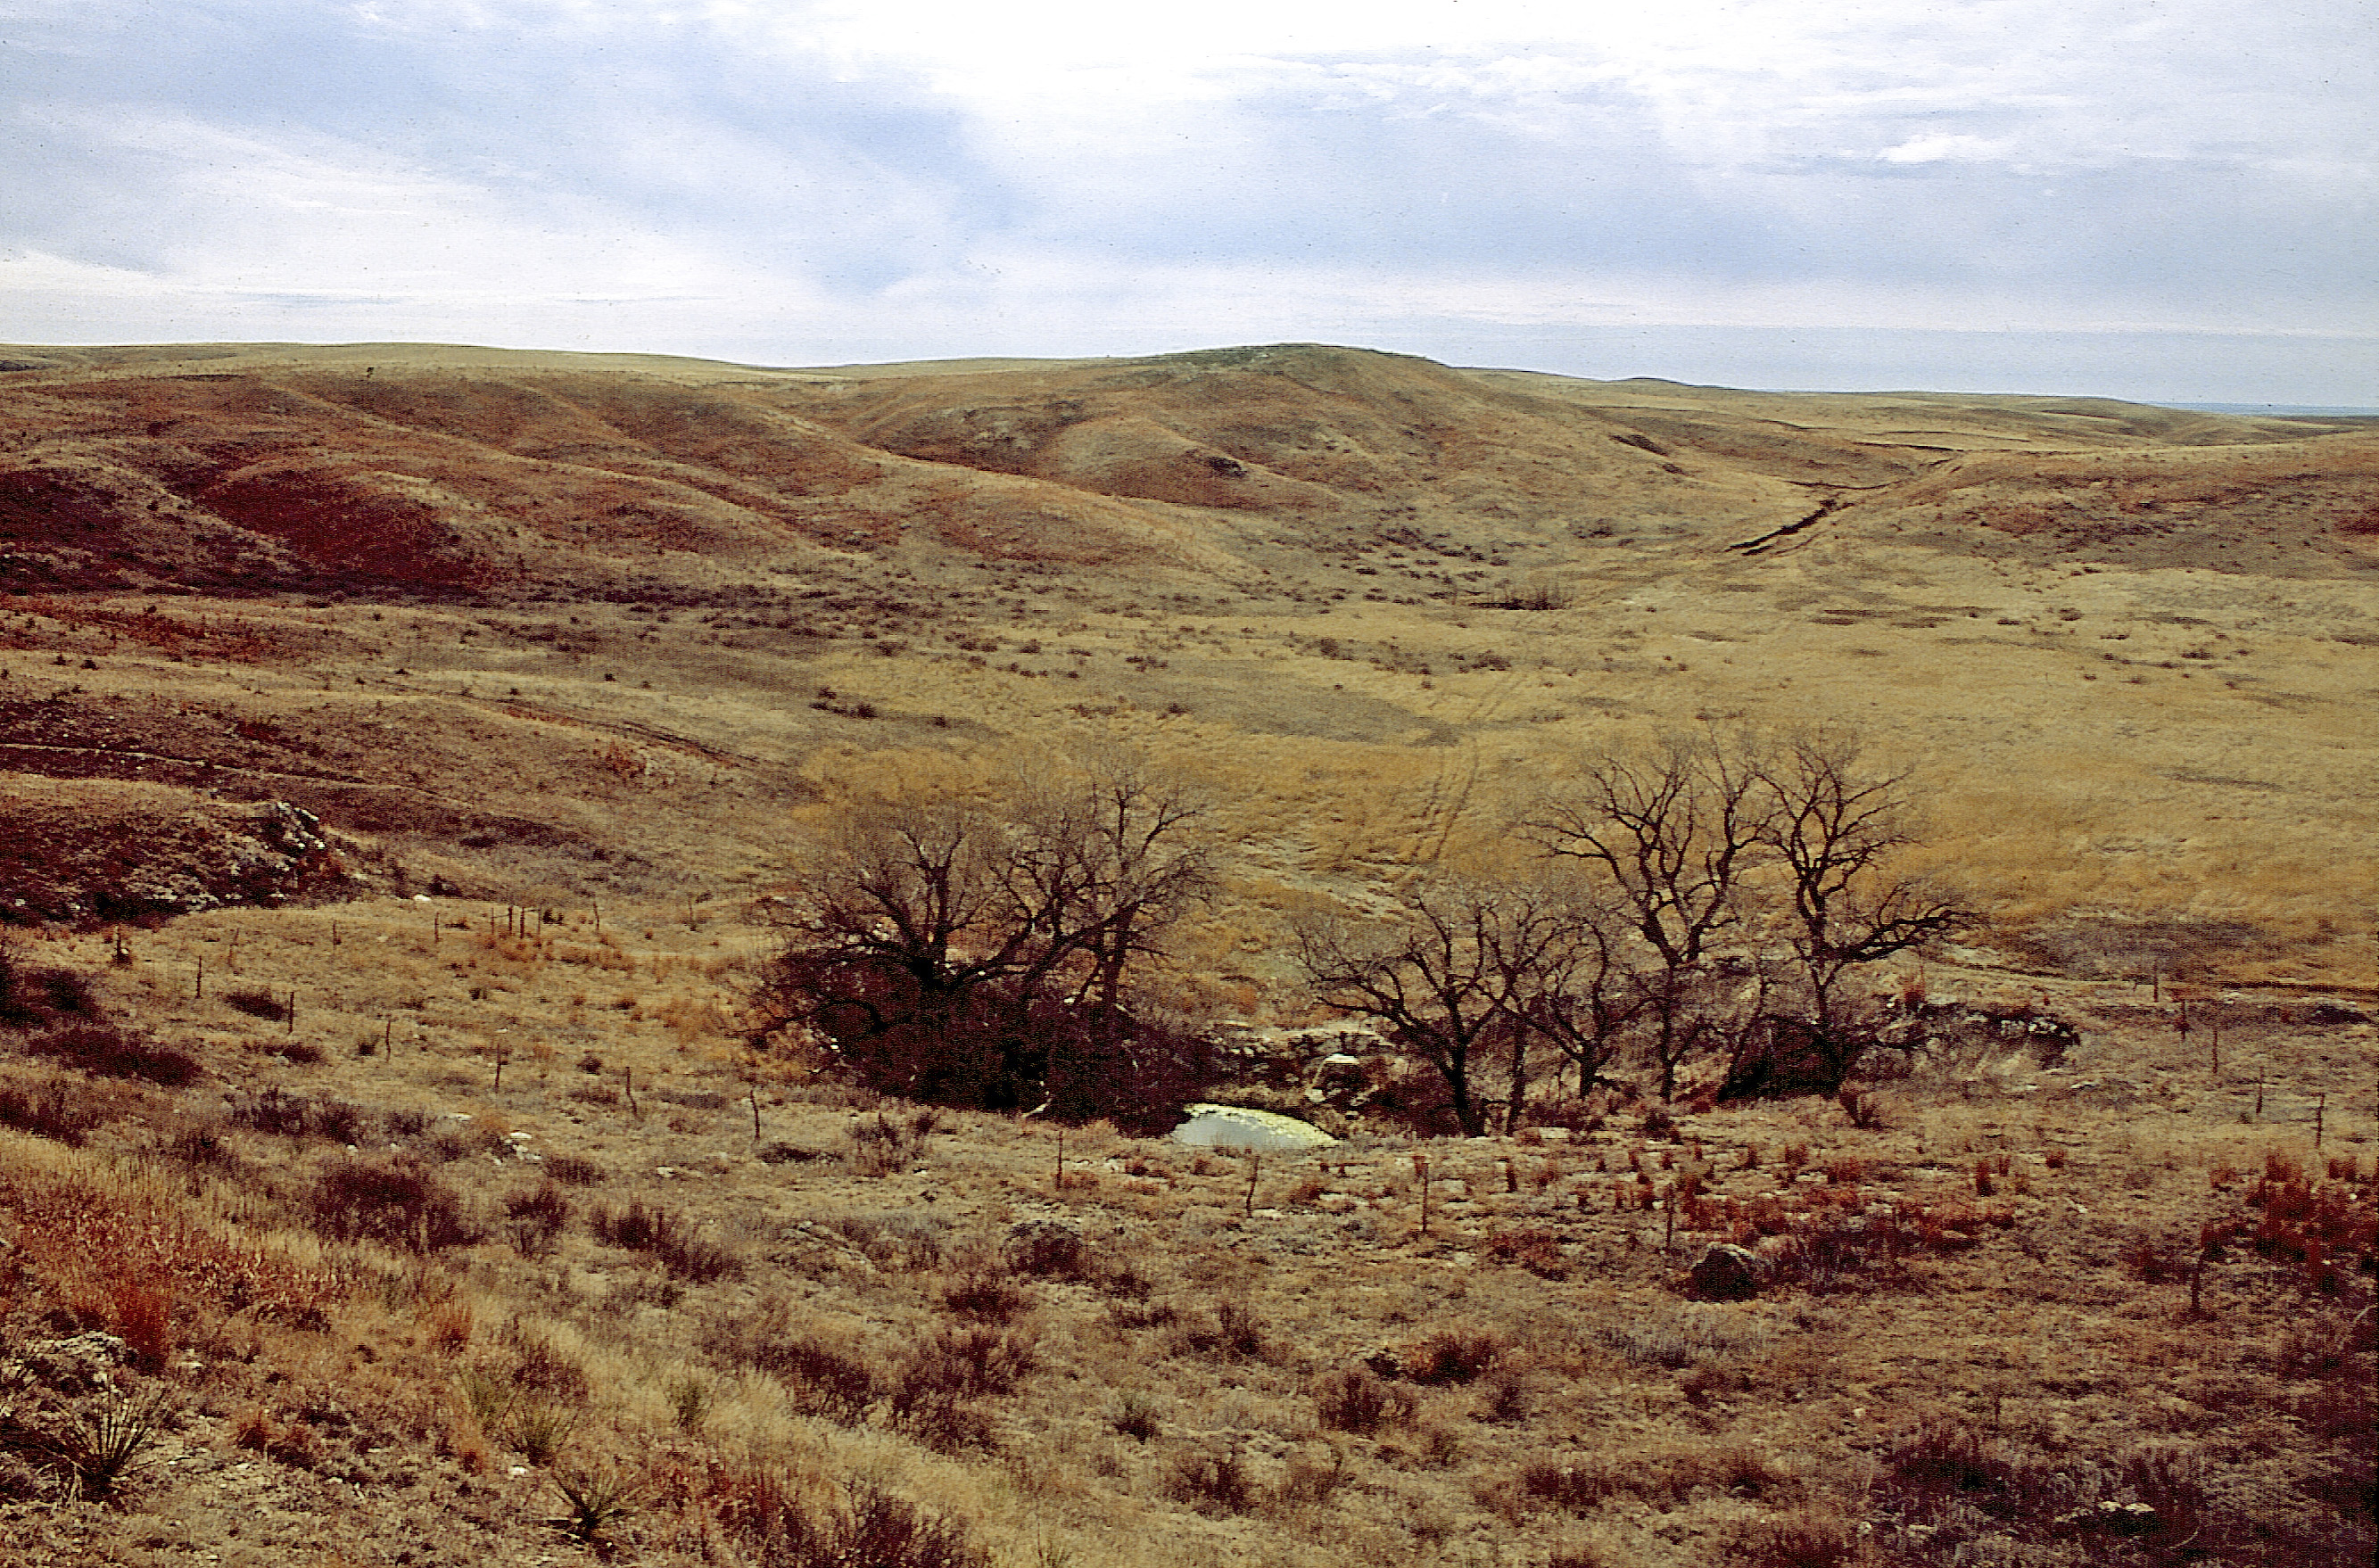 Little Basin with St. Jacob's Well in center, Clark County.